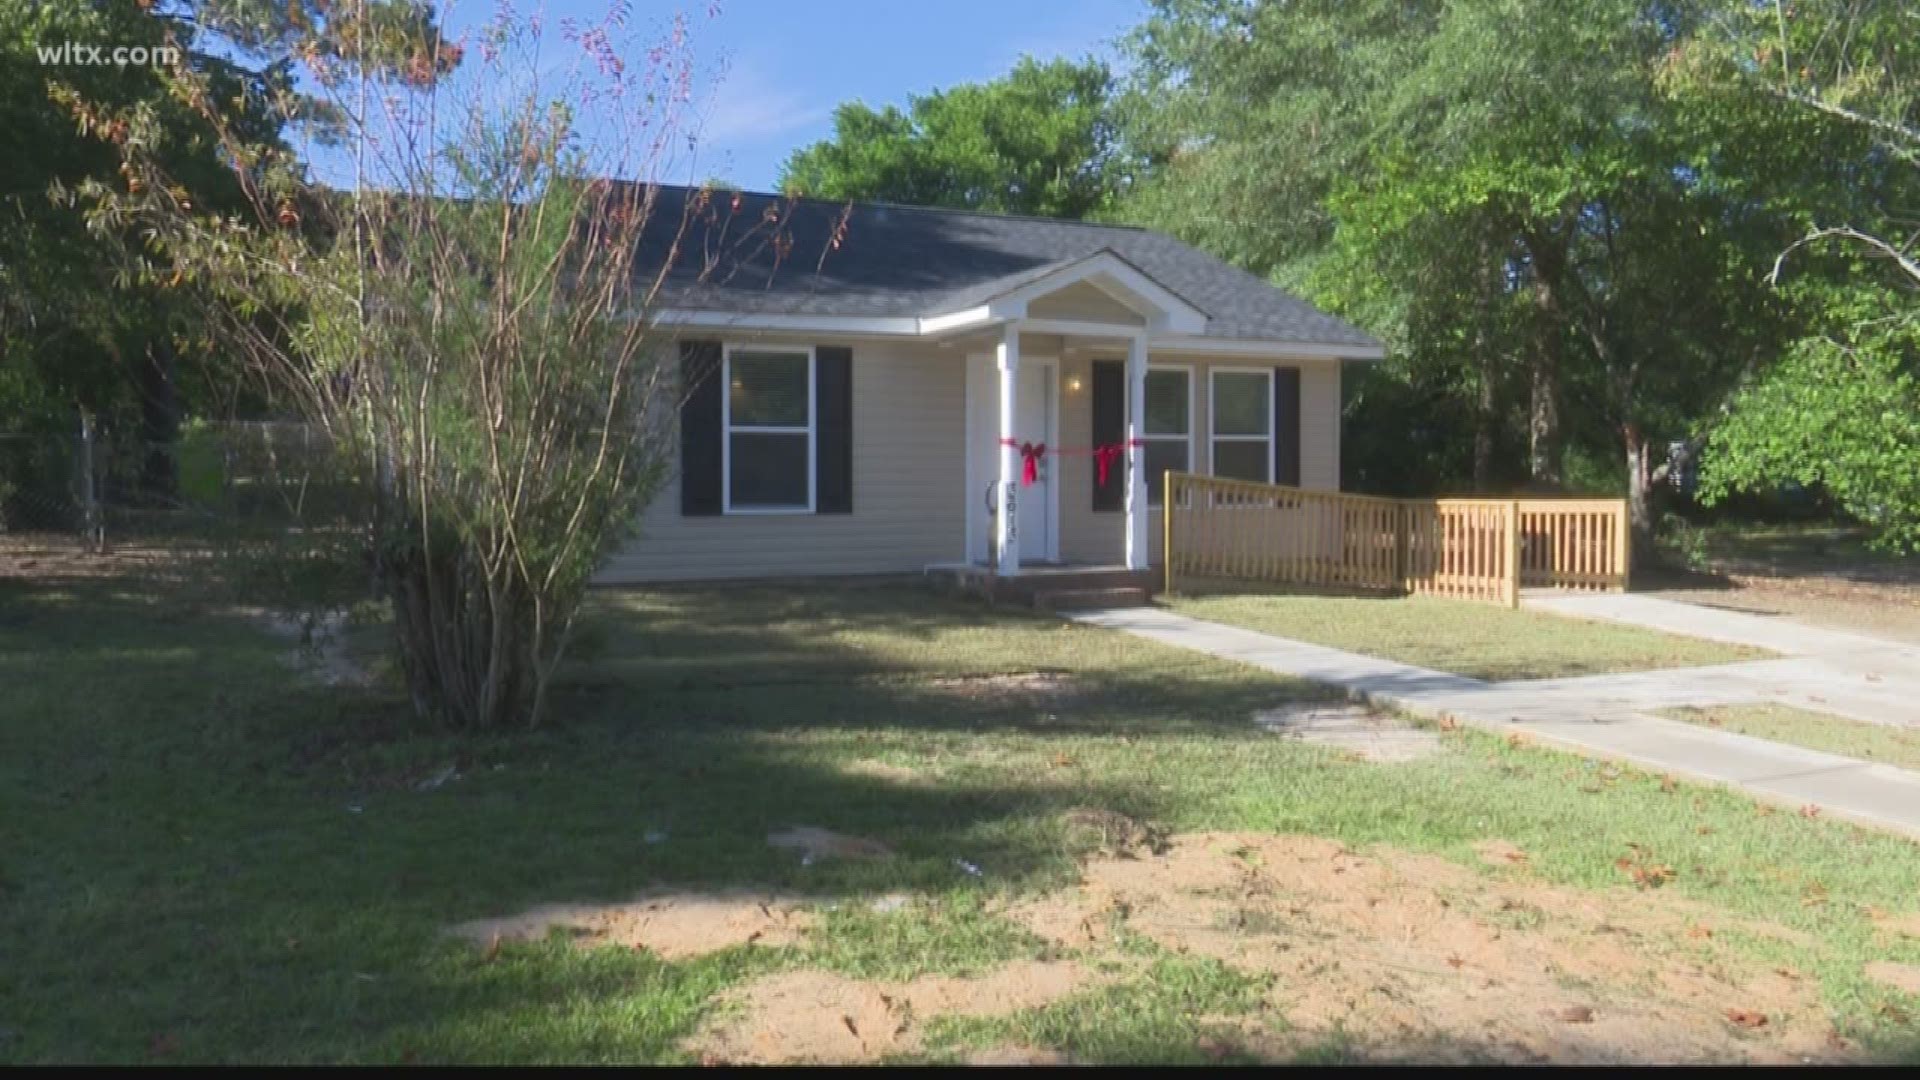 What was once a run-down, boarded up house in a northeast Columbia neighborhood is now making history.
	After months of renovation, the building is now South Carolina's first "Senior Smart home".